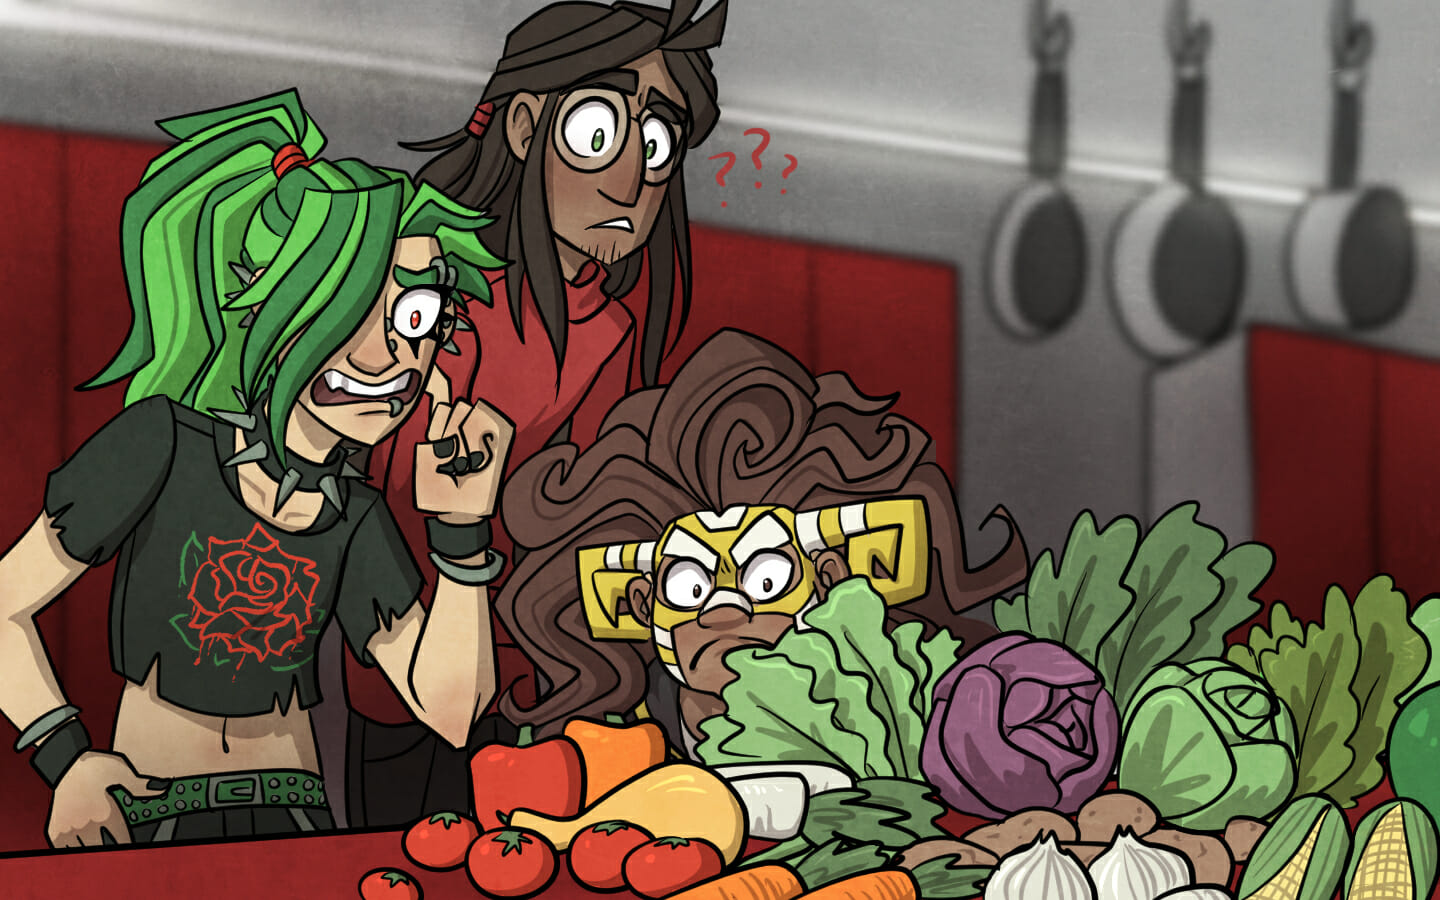 Timaeus, Jurou, and Gugalanna inspect the large pile of veggies on the kitchen counter.